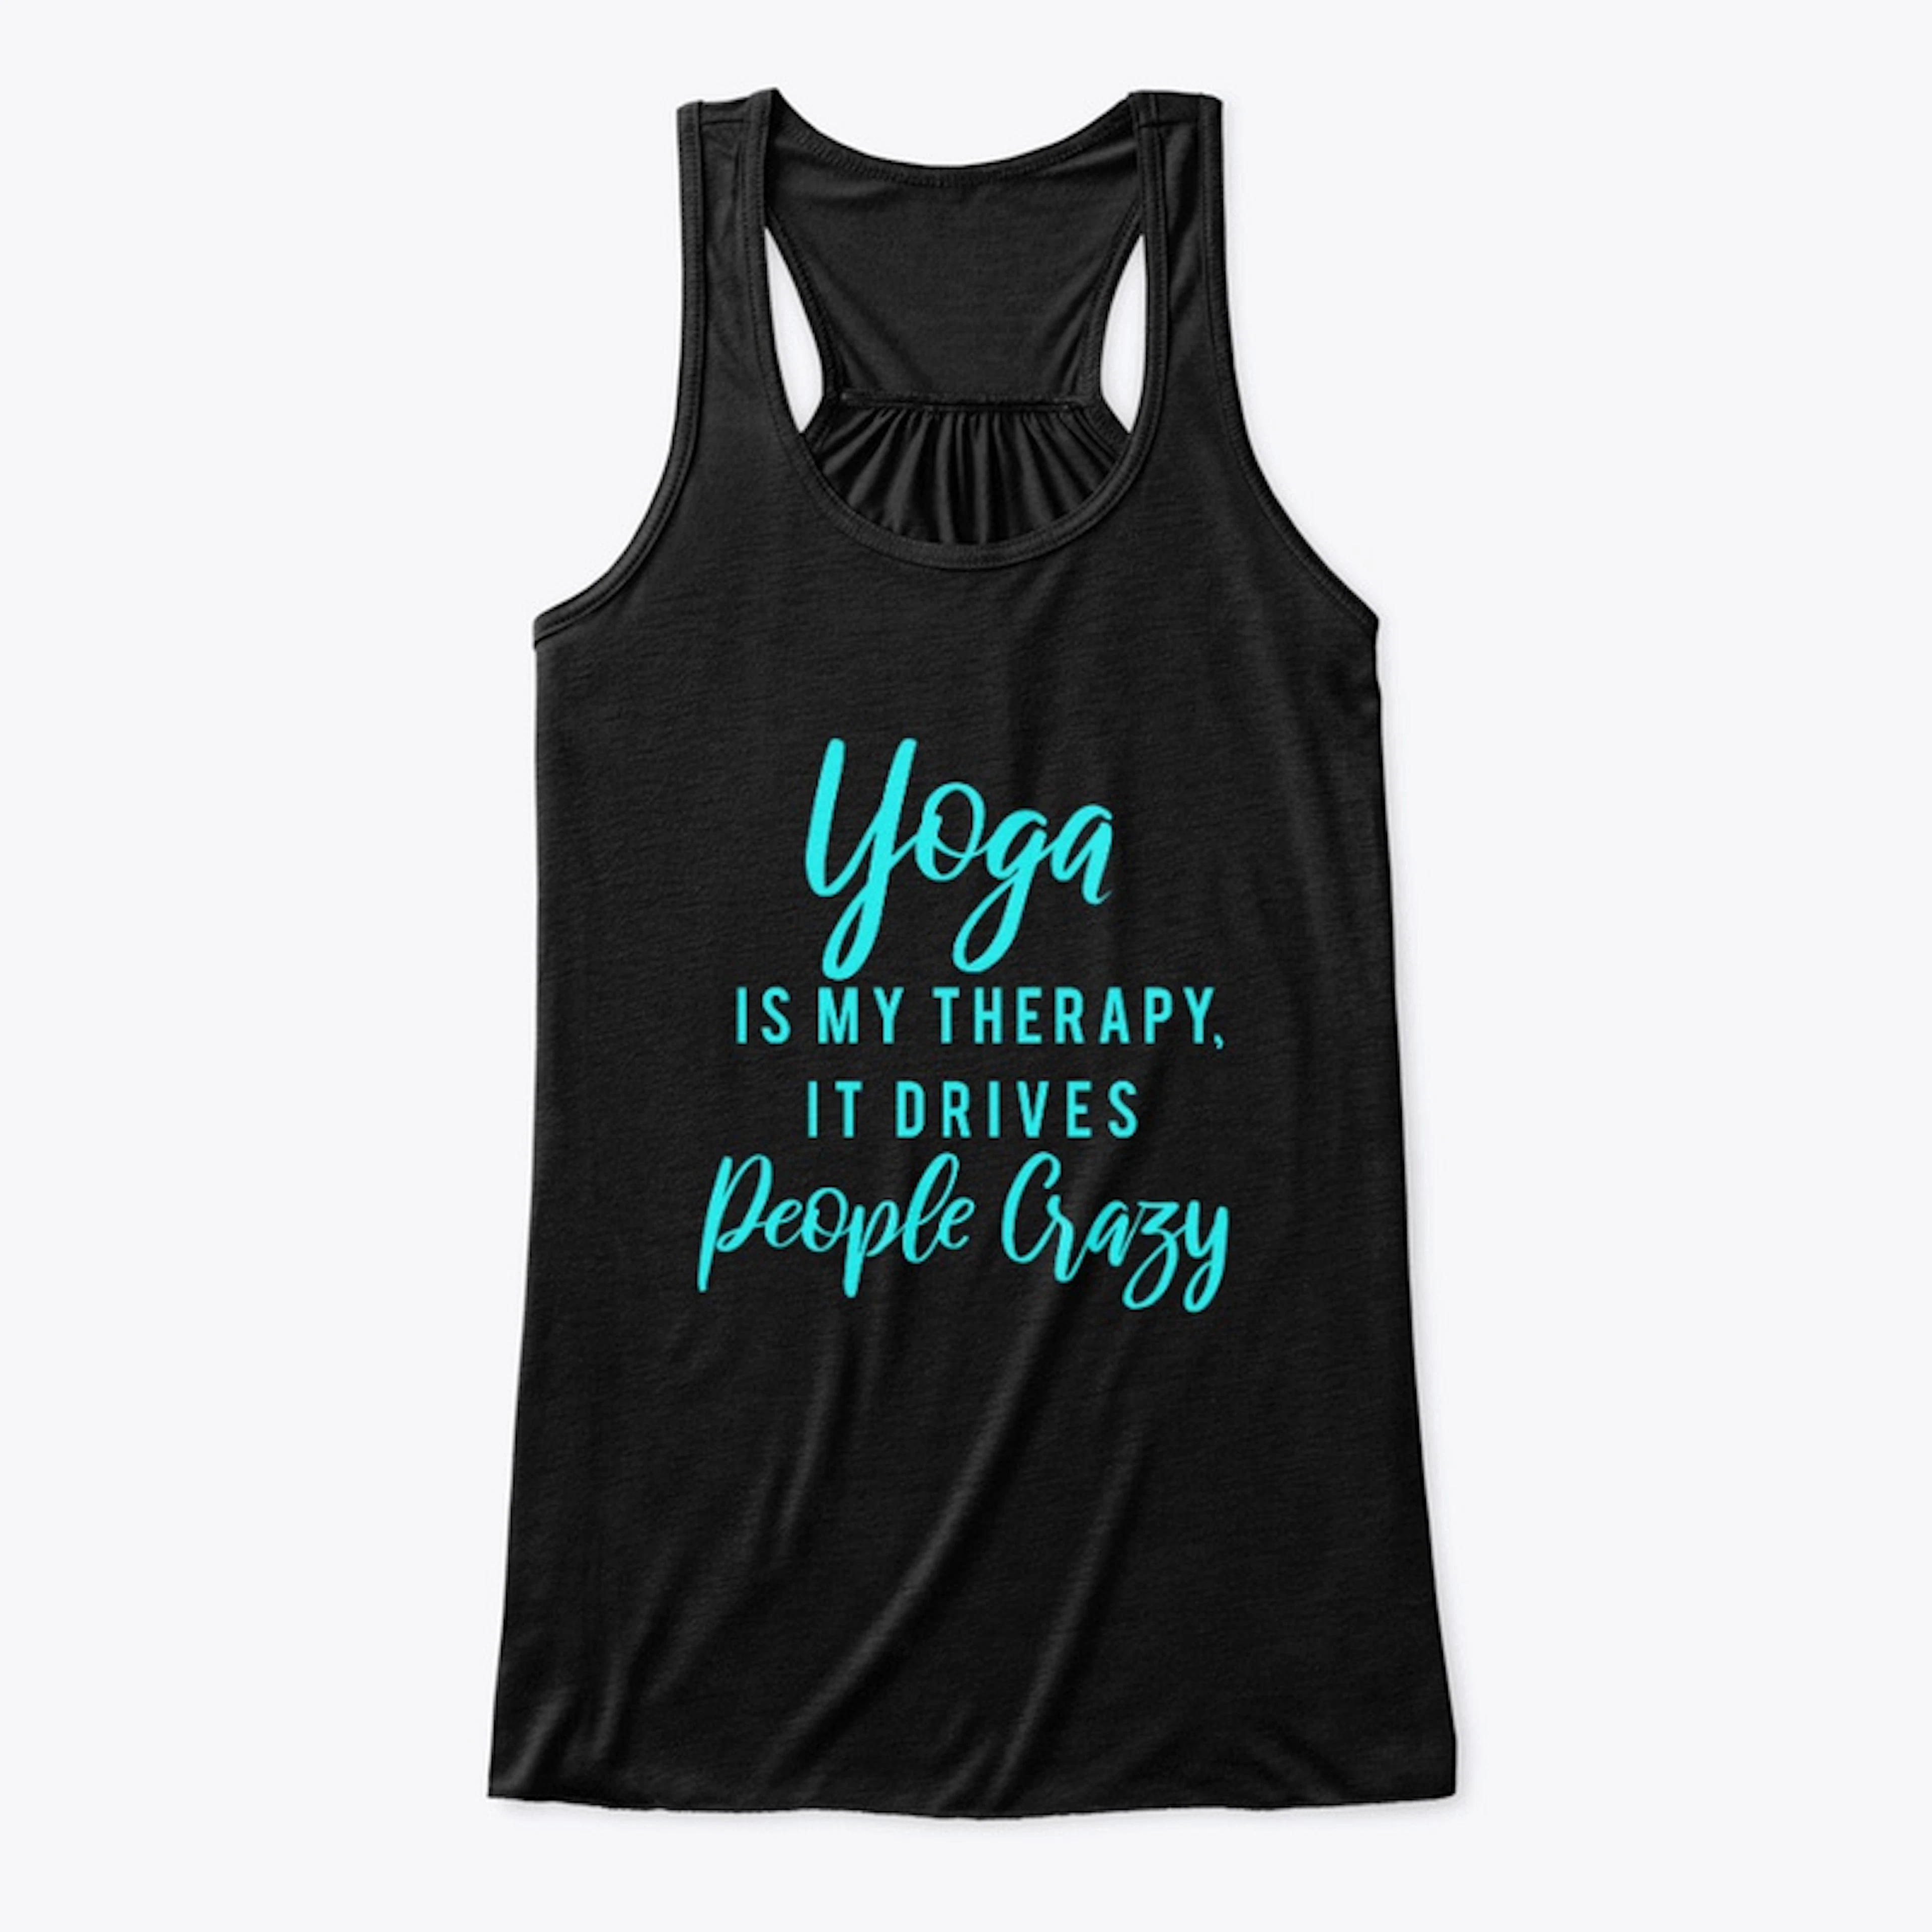  Yoga top for your daily yoga therapy